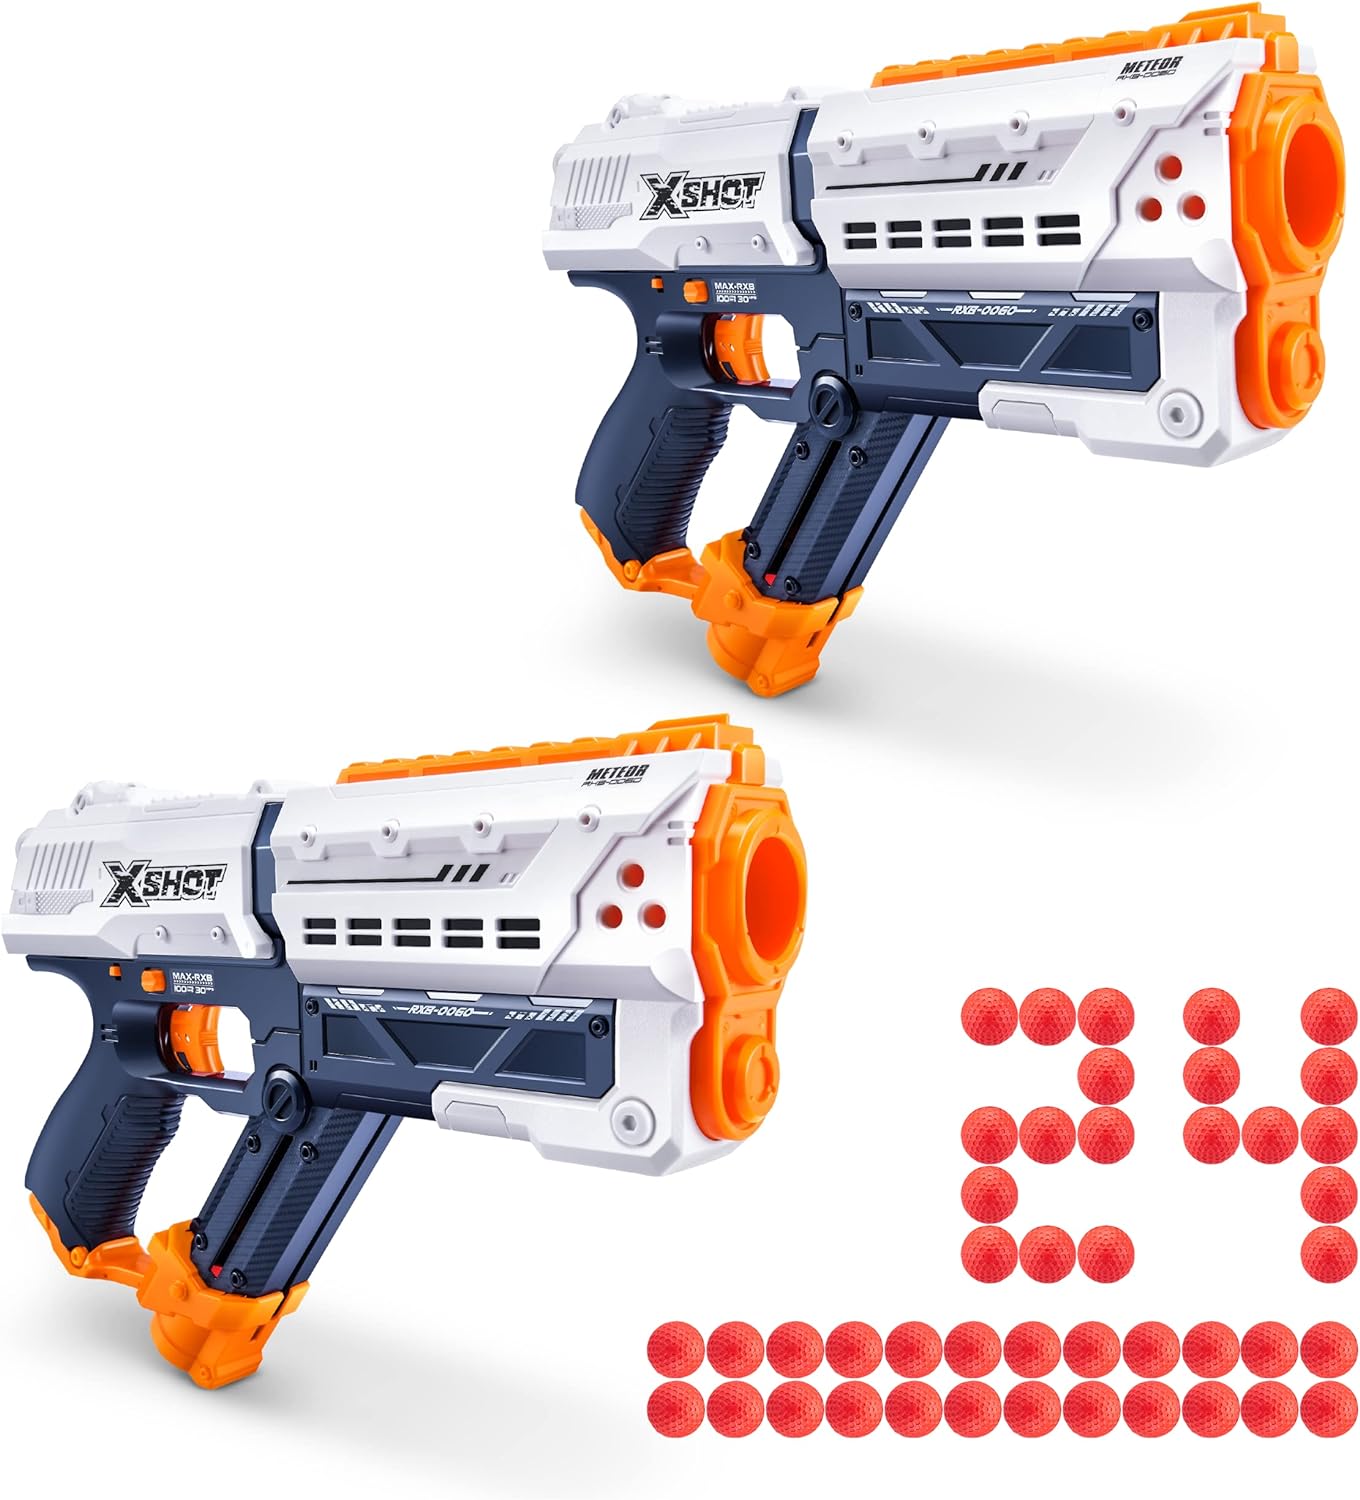 Chaos Meteor Blaster (2 Pack + 24 Darts) by ZURU, X-Shot White Dart Ball Blaster, Toy Blaster, Easy Reload, Rapid Fire Power, Quick Fast Reload, Toys for Kids, Boys, Teens, Adults (White)